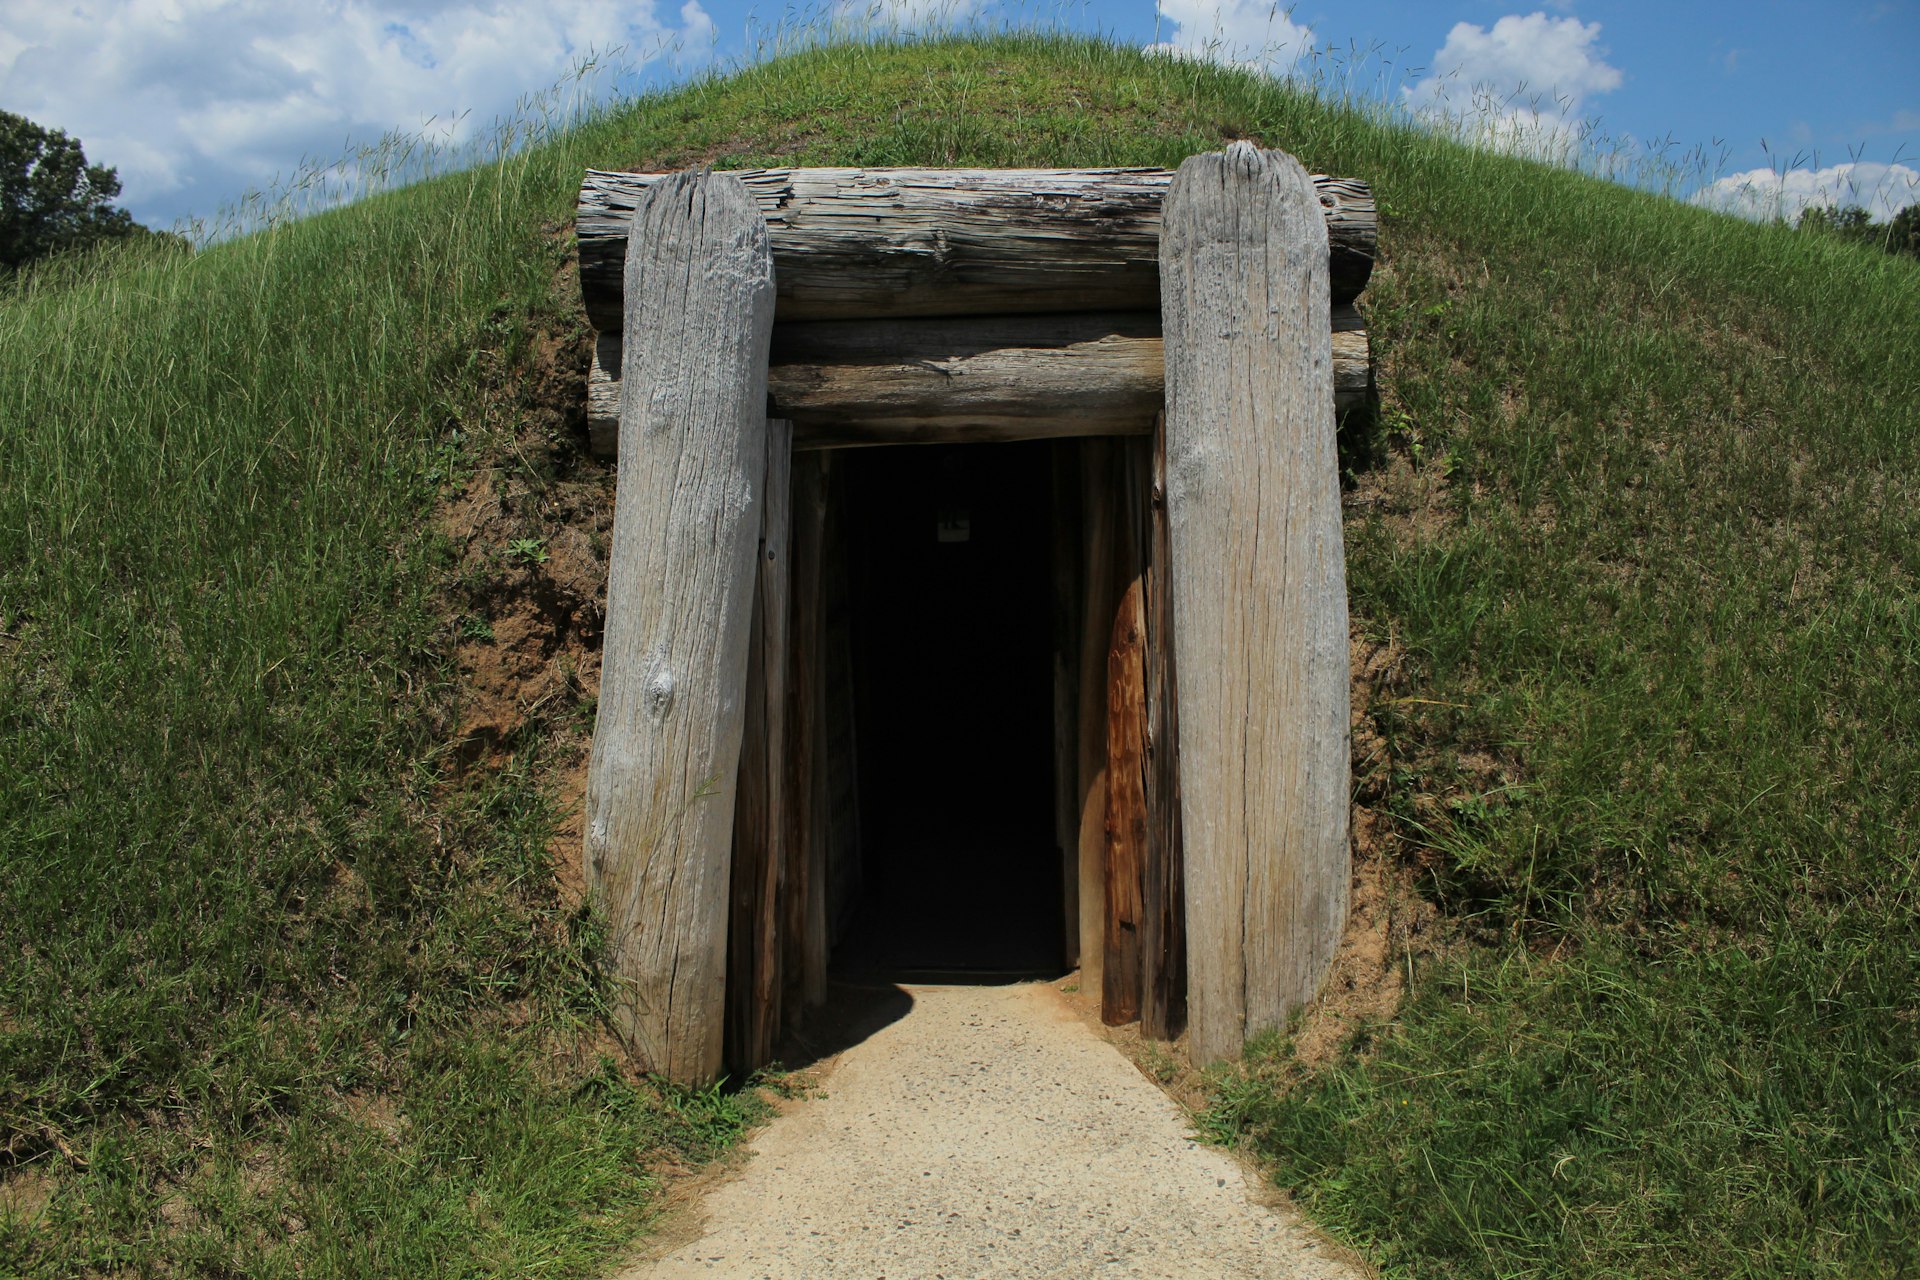 Large pieces of wood make up the doorway of the Ocmulgee Mounds in Georgia.